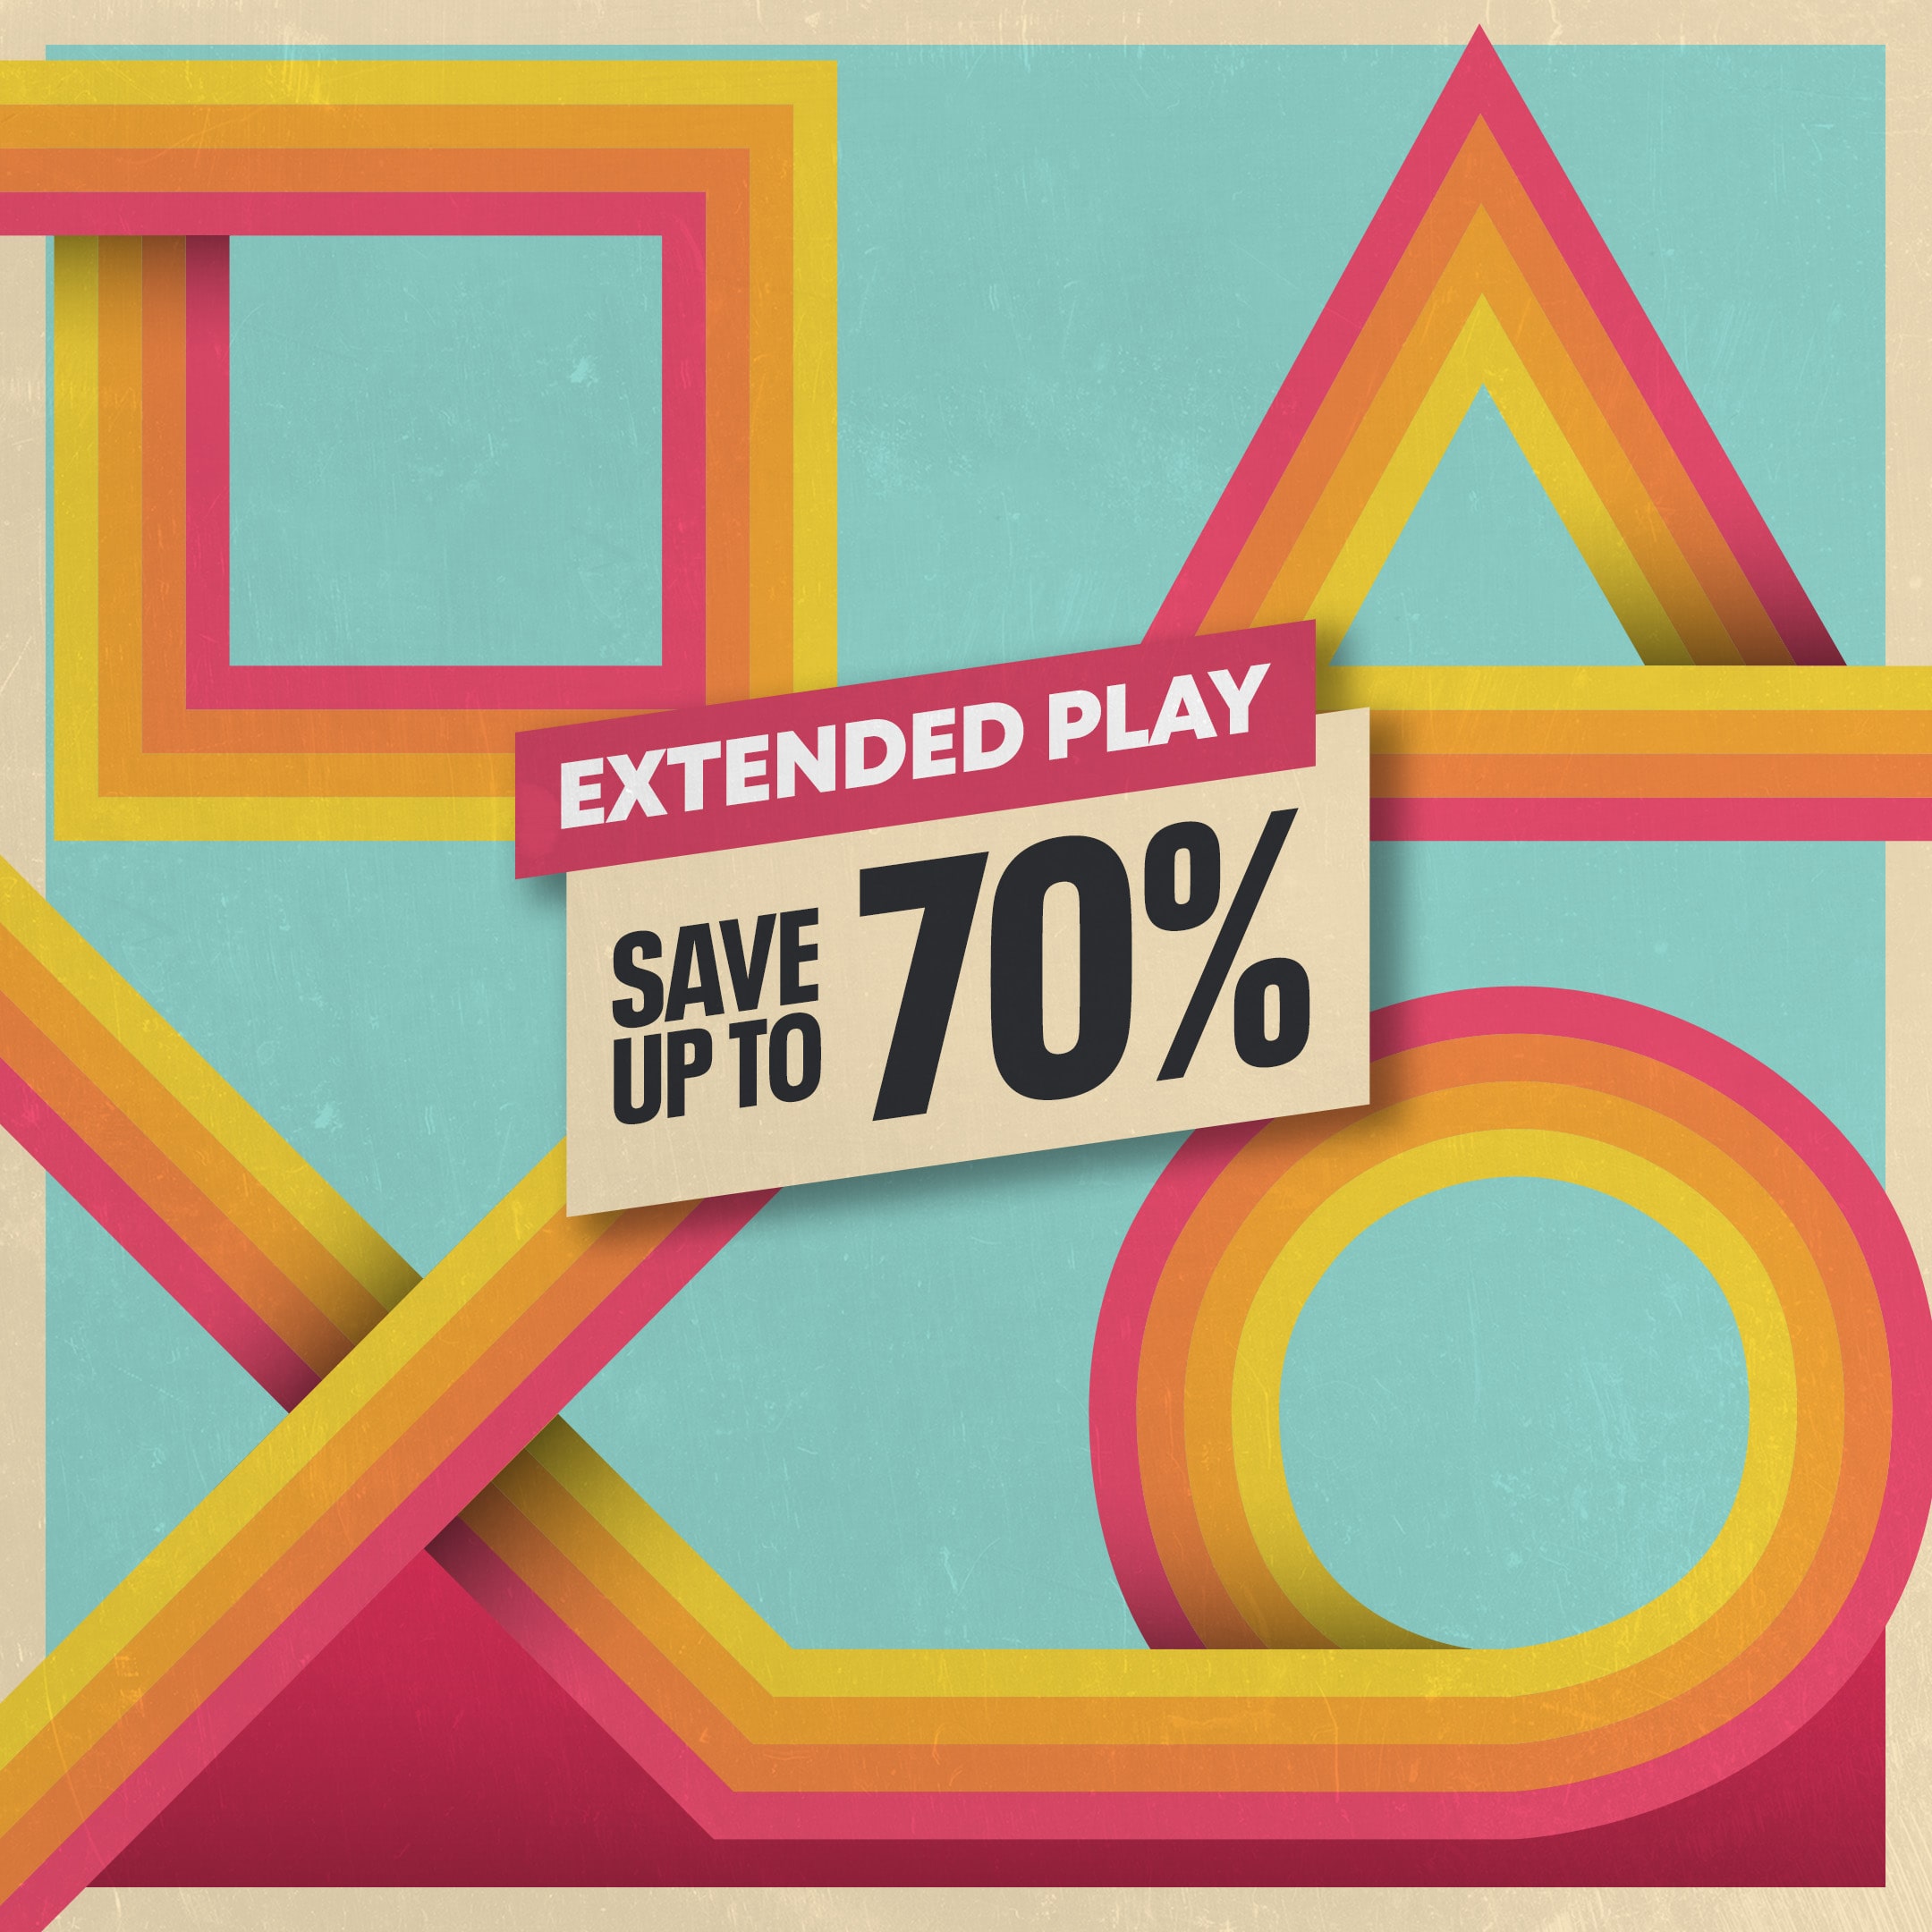 [PROMO] Extended Play